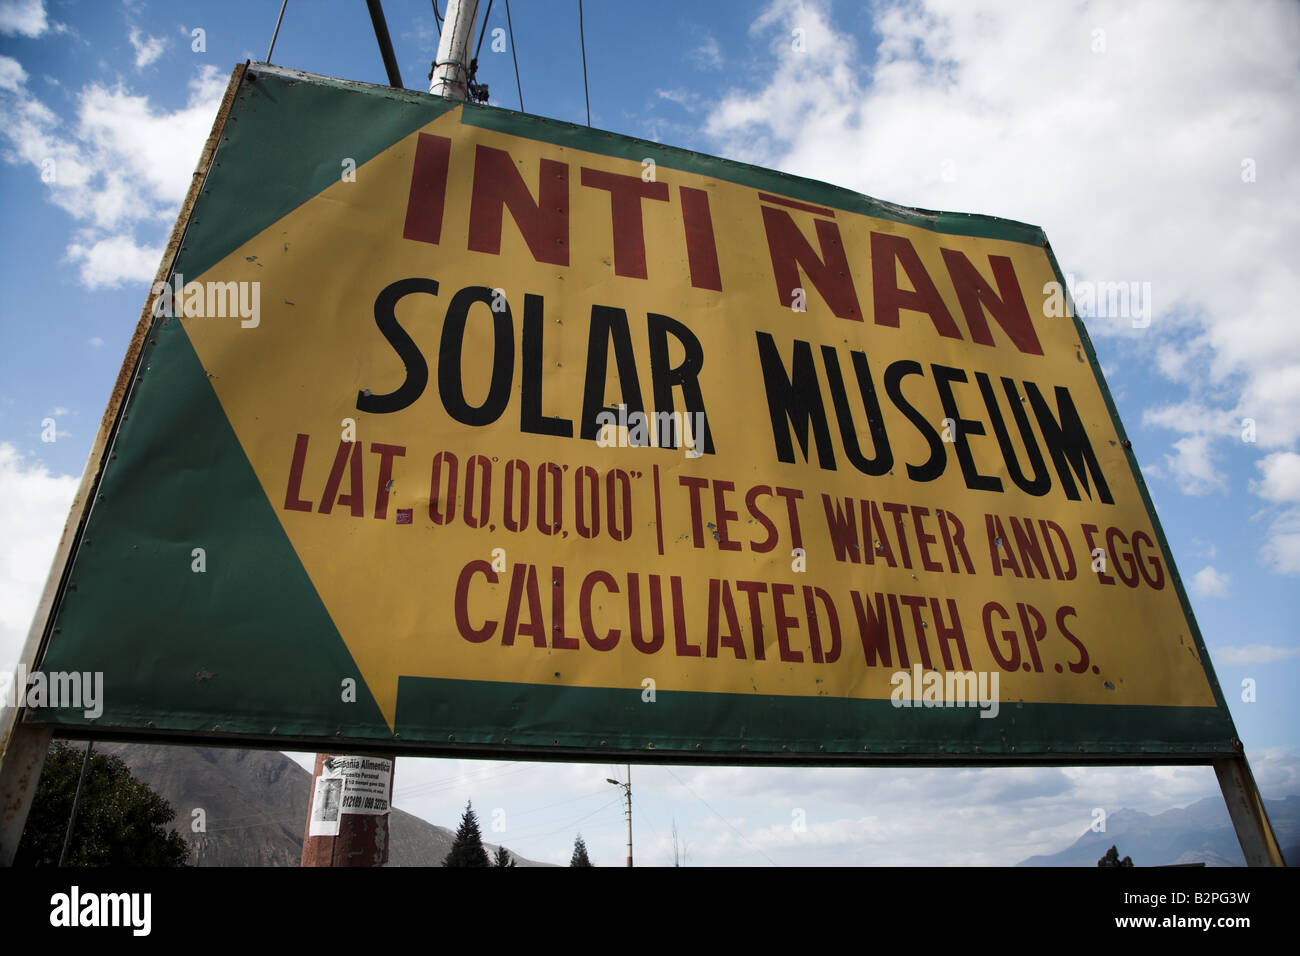 The sign for the Solar Museum Intinian on the equator line near Quito in Ecuador. Stock Photo